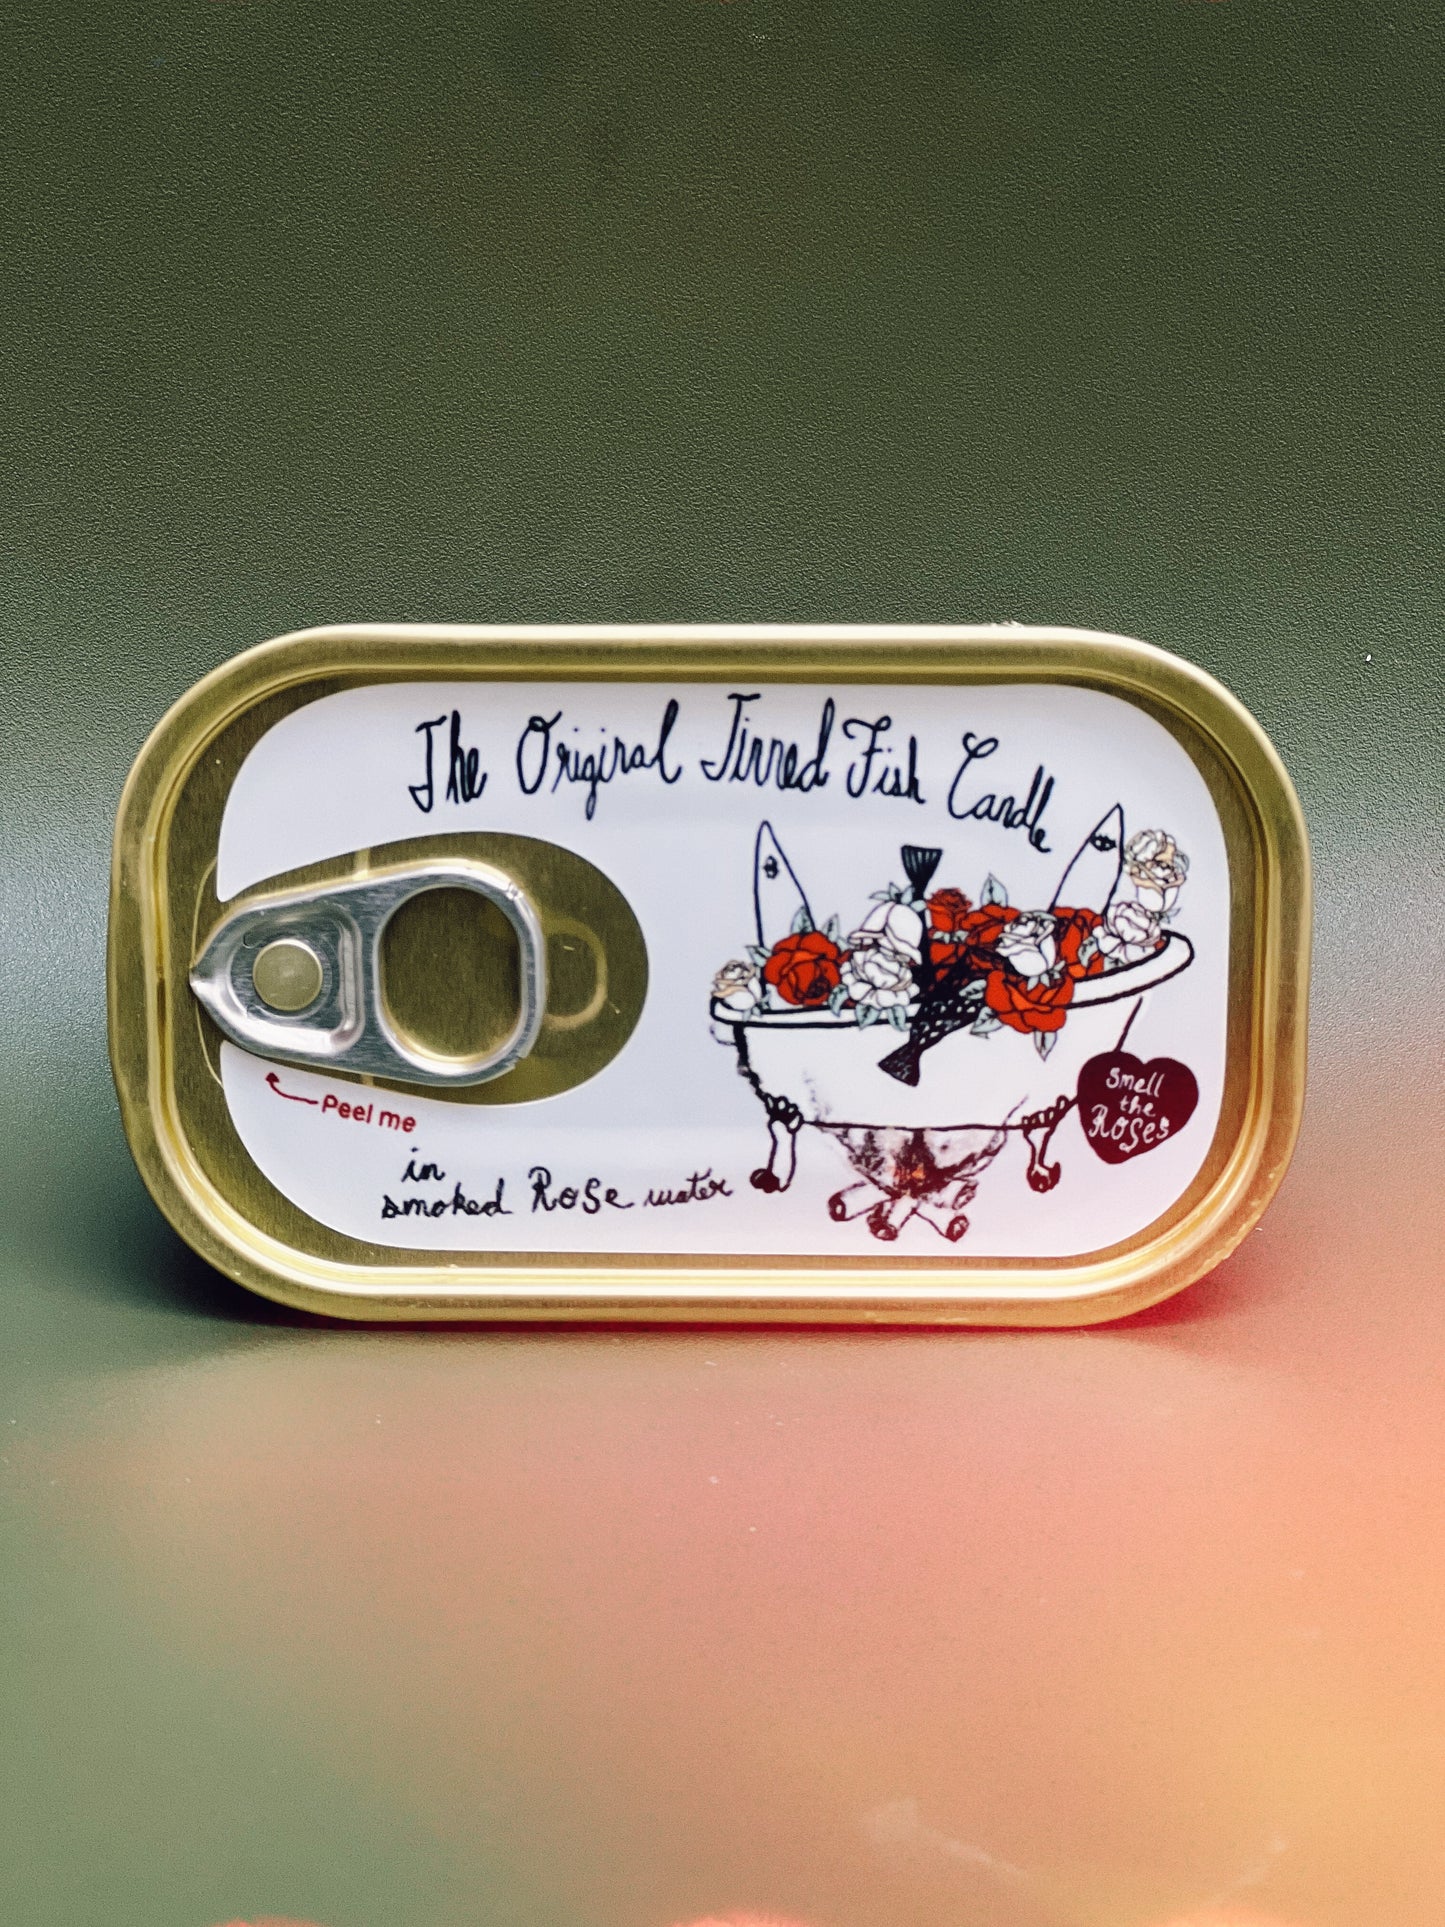 Tinned Fish Candle - Smoked Rose Water (Roses and Campfire Scented)